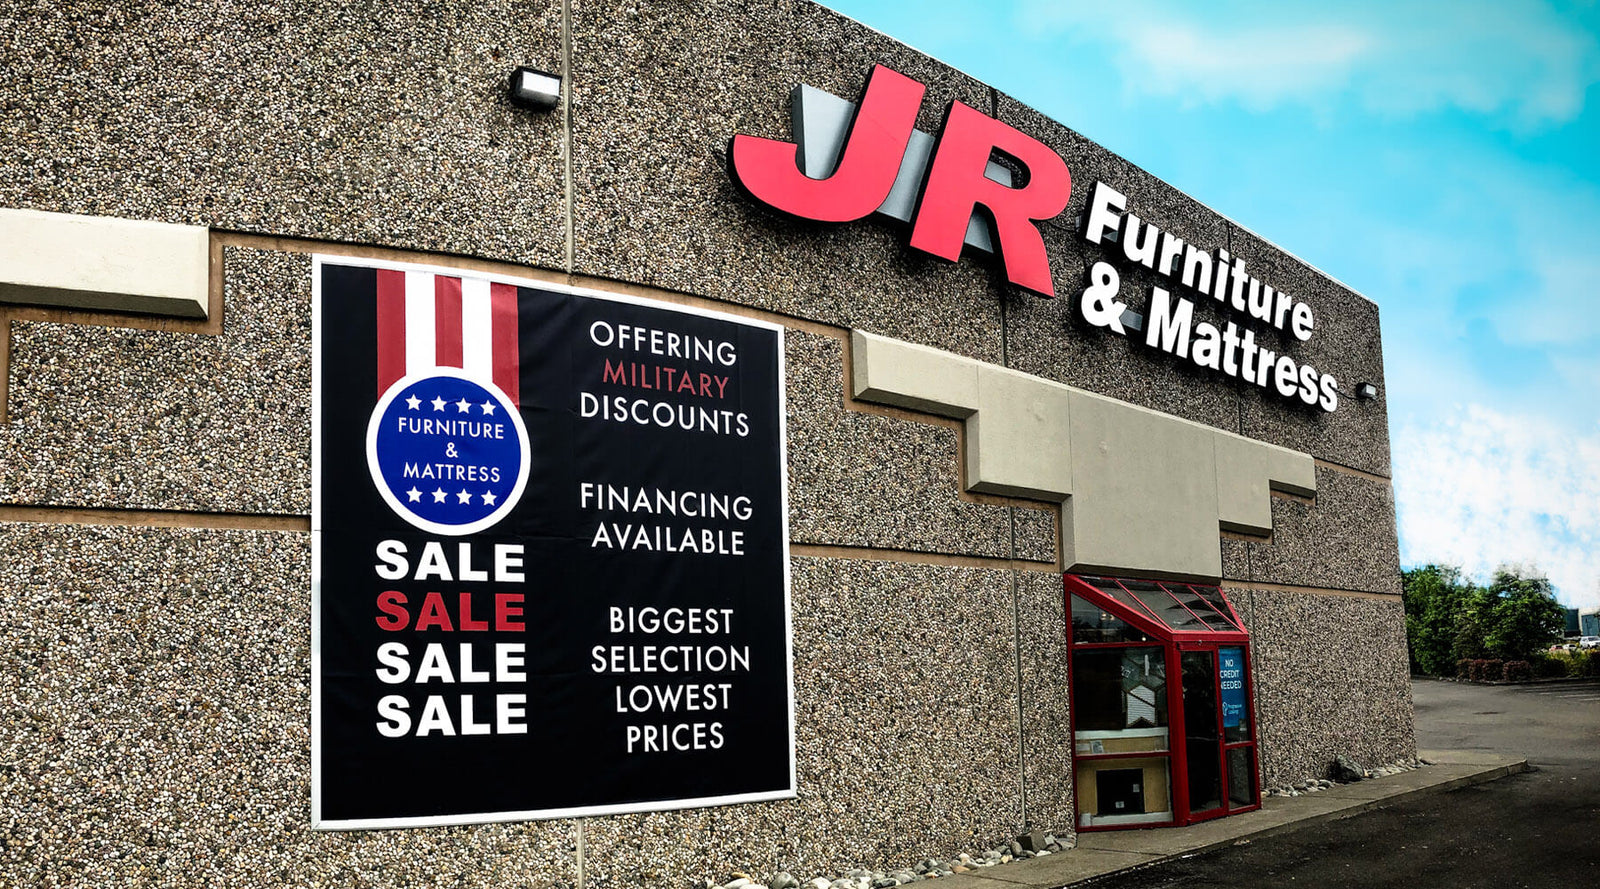 Large banner display and illuminated channel lettering sign for JR Furniture and Mattress on a sunny summer day